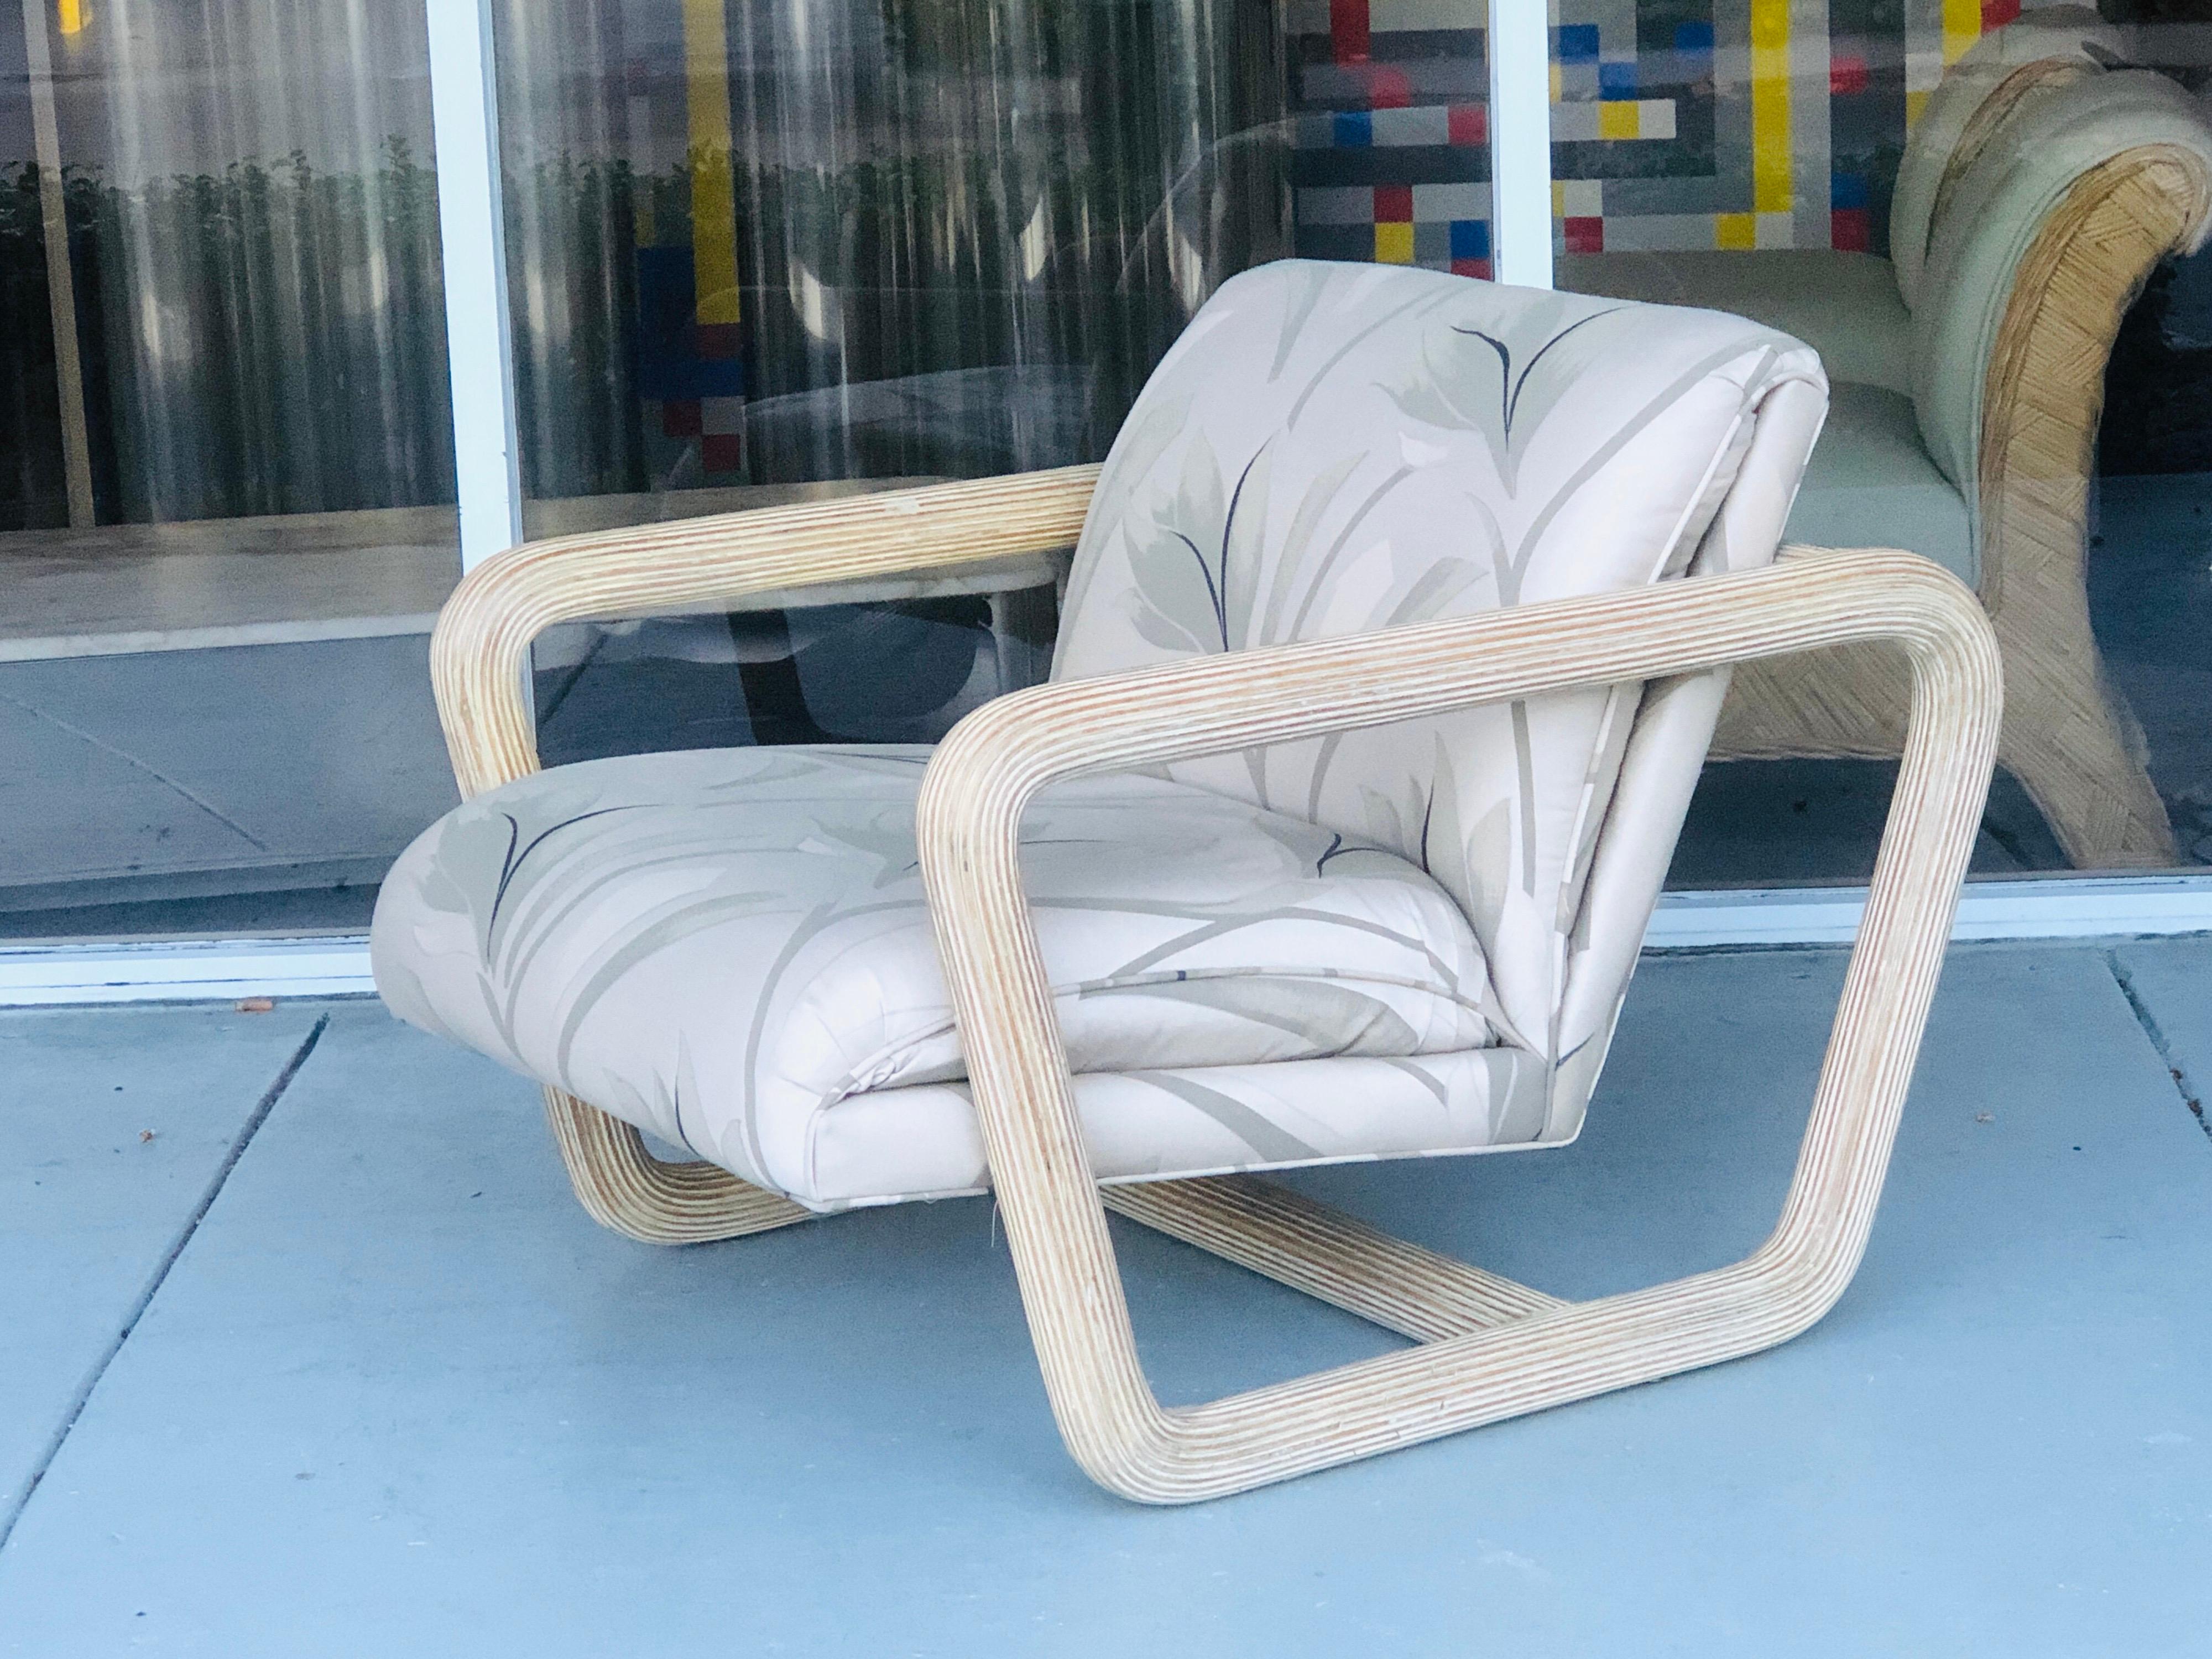 A beautiful 1980s modernist lounge chair. The aerodynamic frame is covered in pencil reed. Tropical modernism at its best.